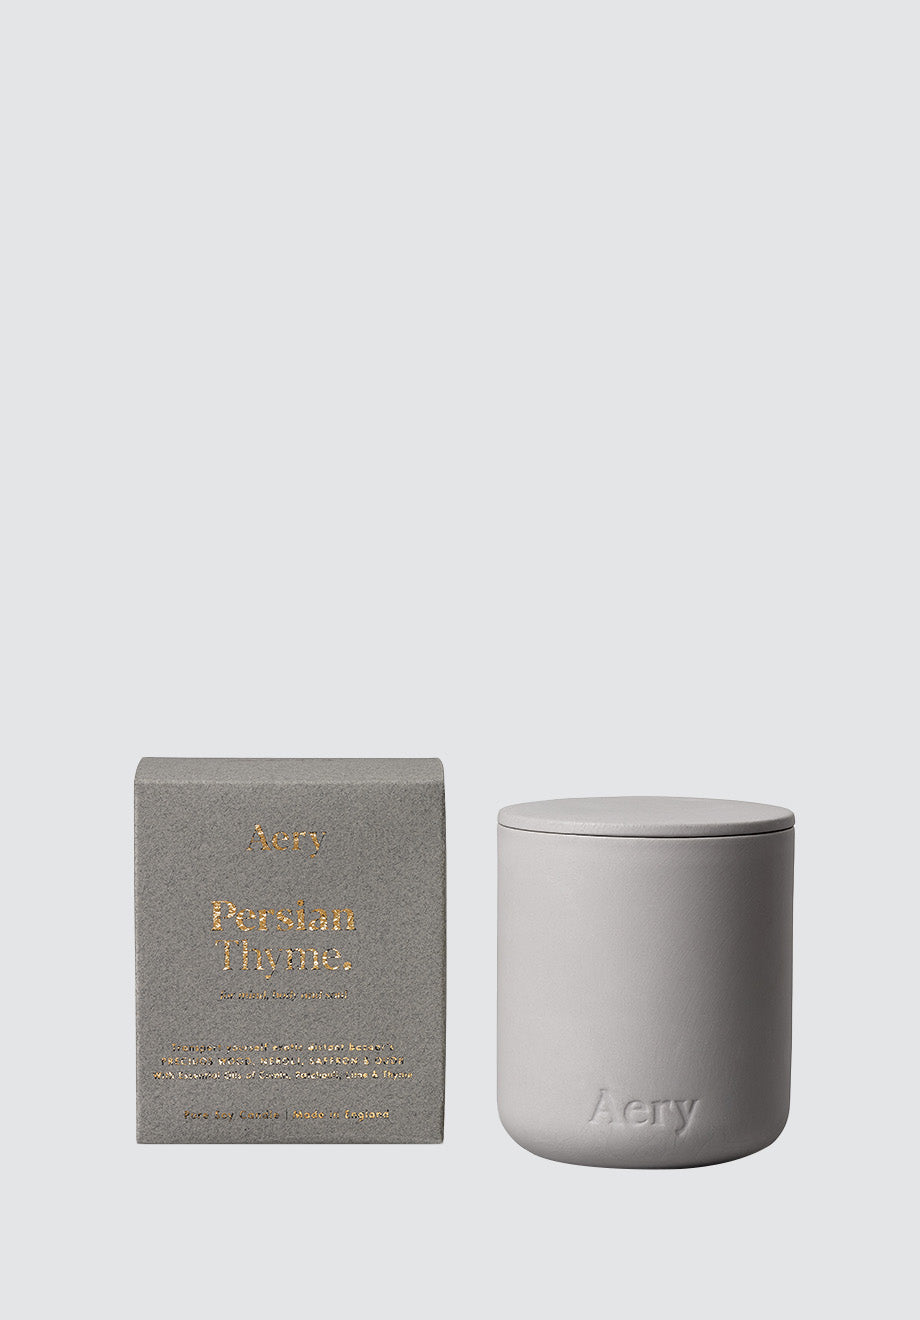 Persian Thyme Scented Candle | Light Grey Clay